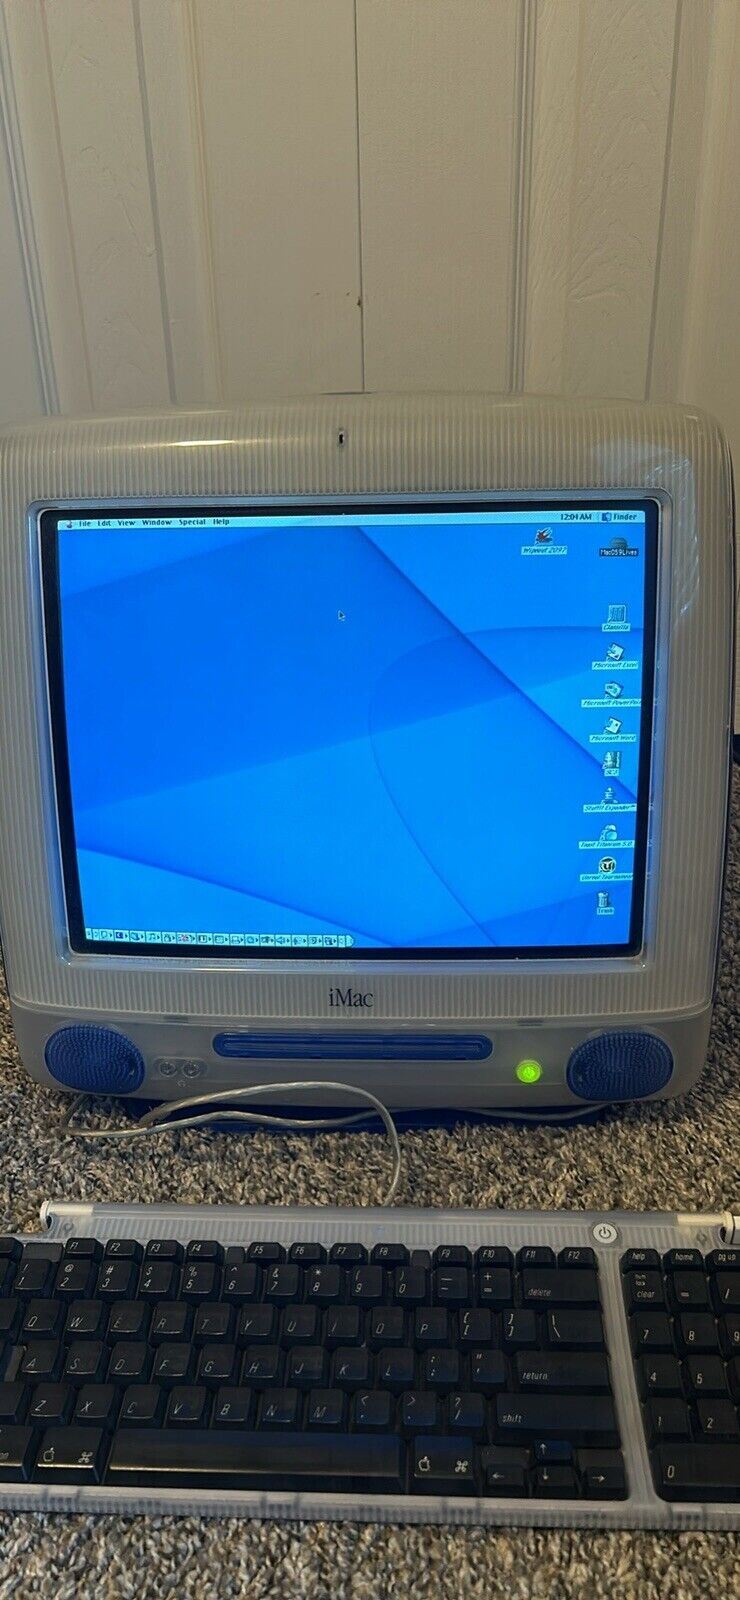 Apple iMac G3 350 MHz 196 MB Ram Blue All In One Computer Tested Works